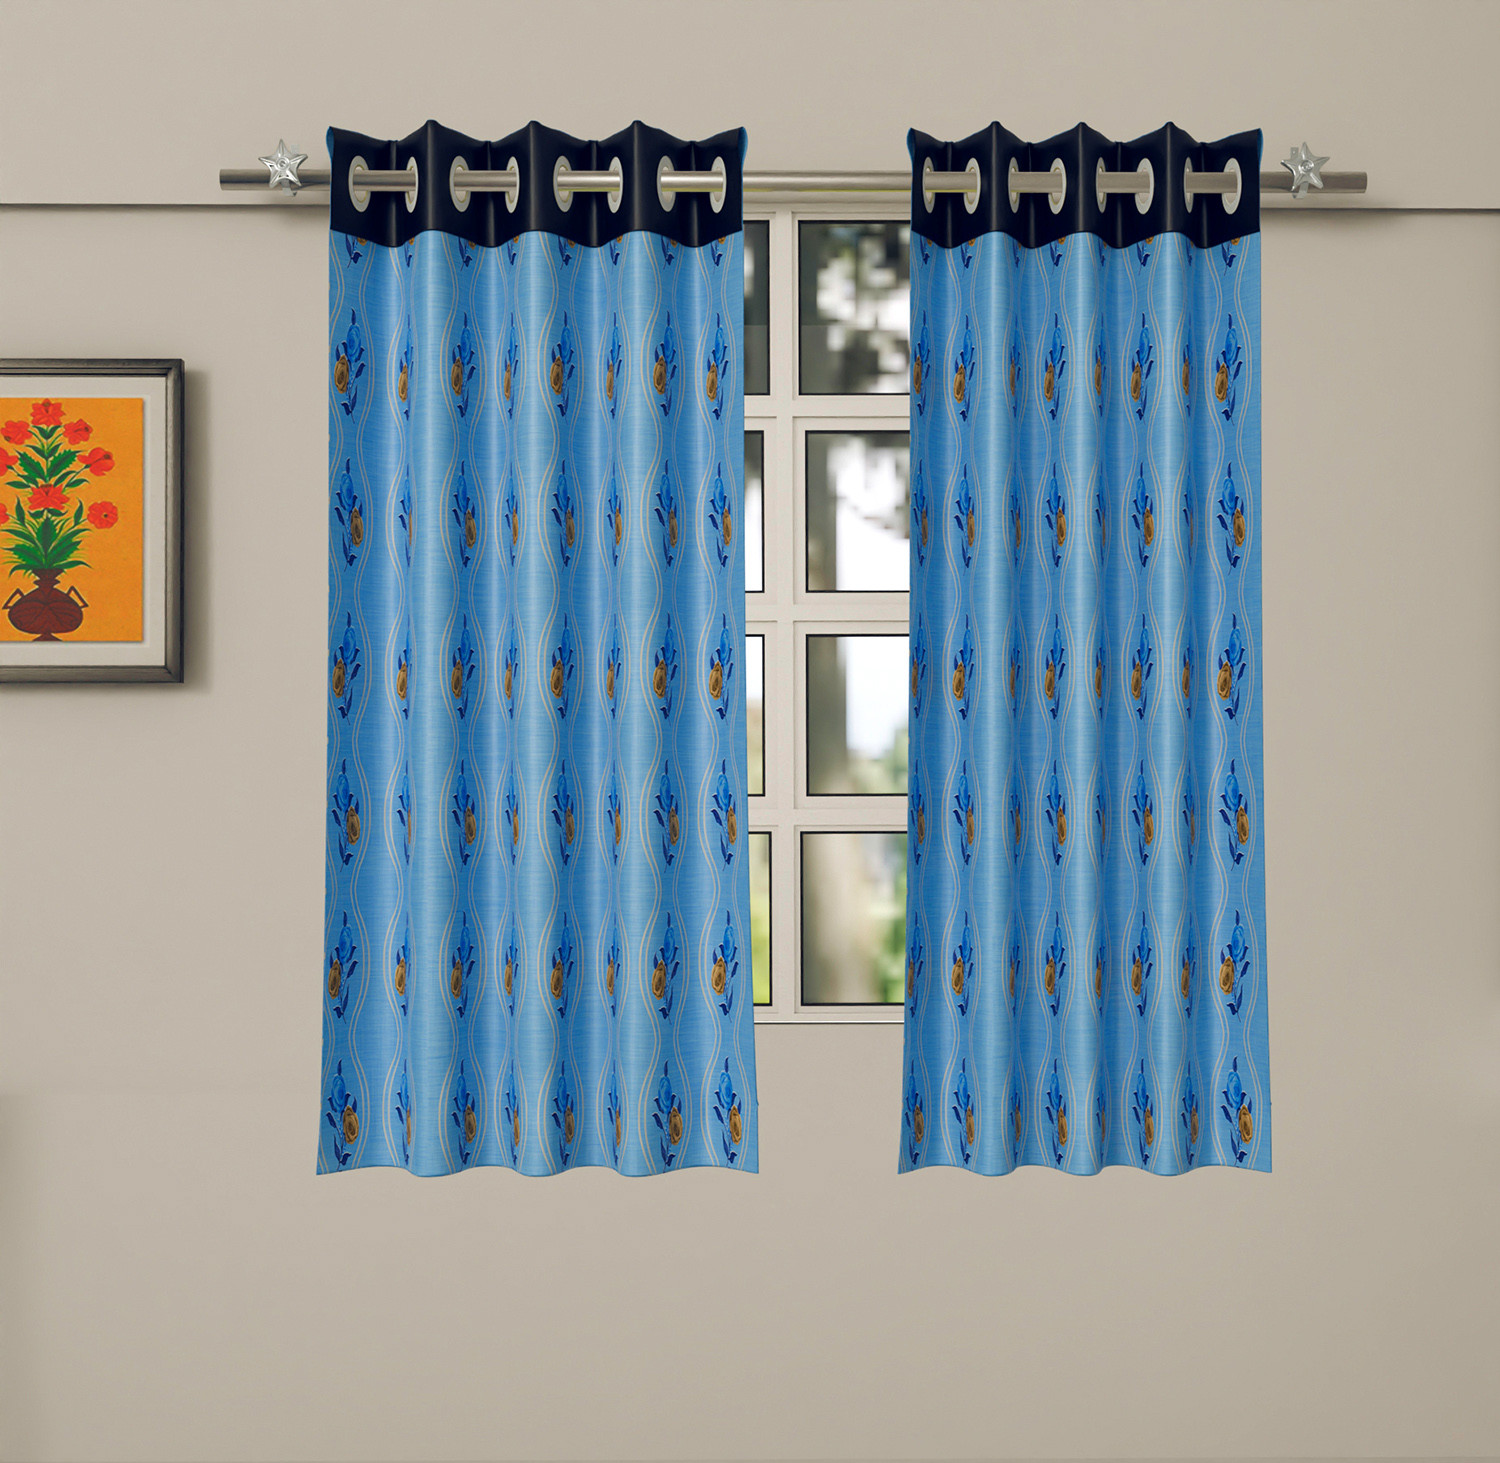 Kuber Industries Polyester Decorative 5 Feet Window Curtain | Rose Print Darkening Blackout | Drapes Curtain With 8 Eyelet For Home & Office (Sky Blue)